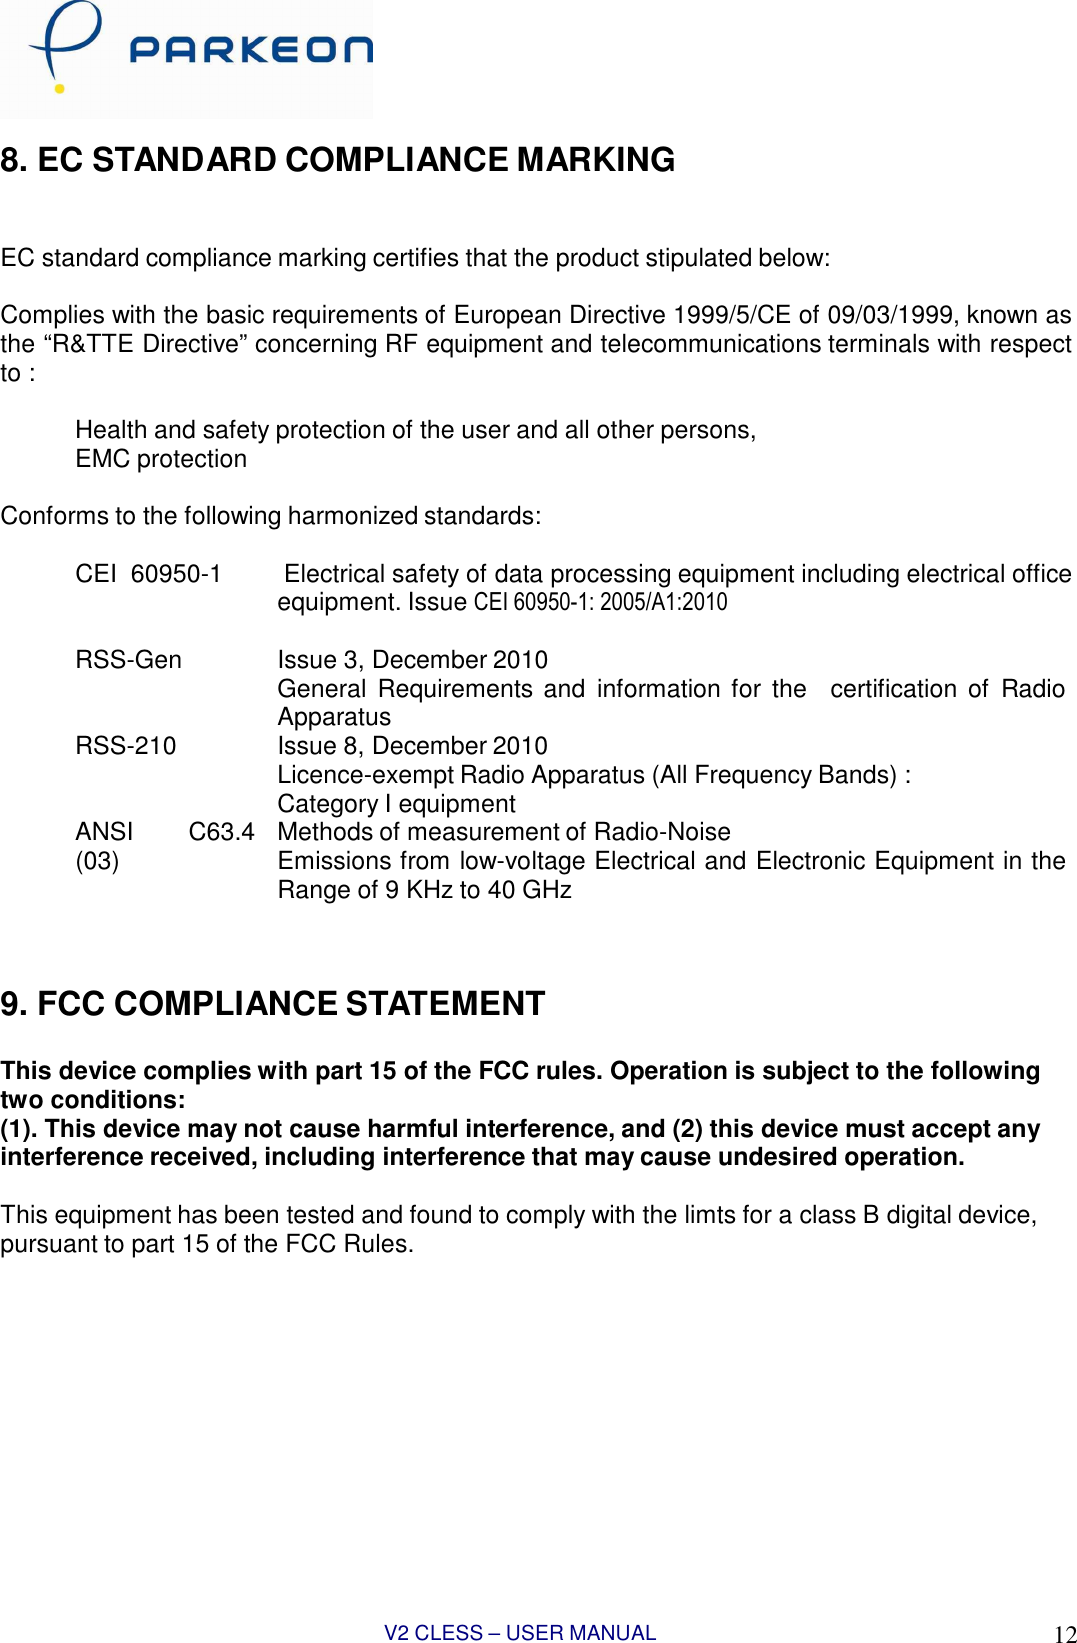 V2 CLESS – USER MANUAL 1212    8. EC STANDARD COMPLIANCE MARKING    EC standard compliance marking certifies that the product stipulated below:  Complies with the basic requirements of European Directive 1999/5/CE of 09/03/1999, known as the “R&amp;TTE Directive” concerning RF equipment and telecommunications terminals with respect to :      Health and safety protection of the user and all other persons,     EMC protection  Conforms to the following harmonized standards:      CEI  60950-1         Electrical safety of data processing equipment including electrical office equipment. Issue CEI 60950-1: 2005/A1:2010      RSS-Gen              Issue 3, December 2010 General  Requirements and  information for  the   certification of  Radio Apparatus     RSS-210              Issue 8, December 2010 Licence-exempt Radio Apparatus (All Frequency Bands) : Category I equipment    ANSI        C63.4 (03)  Methods of measurement of Radio-Noise Emissions from low-voltage Electrical and Electronic Equipment in the Range of 9 KHz to 40 GHz    9. FCC COMPLIANCE STATEMENT   This device complies with part 15 of the FCC rules. Operation is subject to the following two conditions: (1). This device may not cause harmful interference, and (2) this device must accept any interference received, including interference that may cause undesired operation.  This equipment has been tested and found to comply with the limts for a class B digital device, pursuant to part 15 of the FCC Rules.